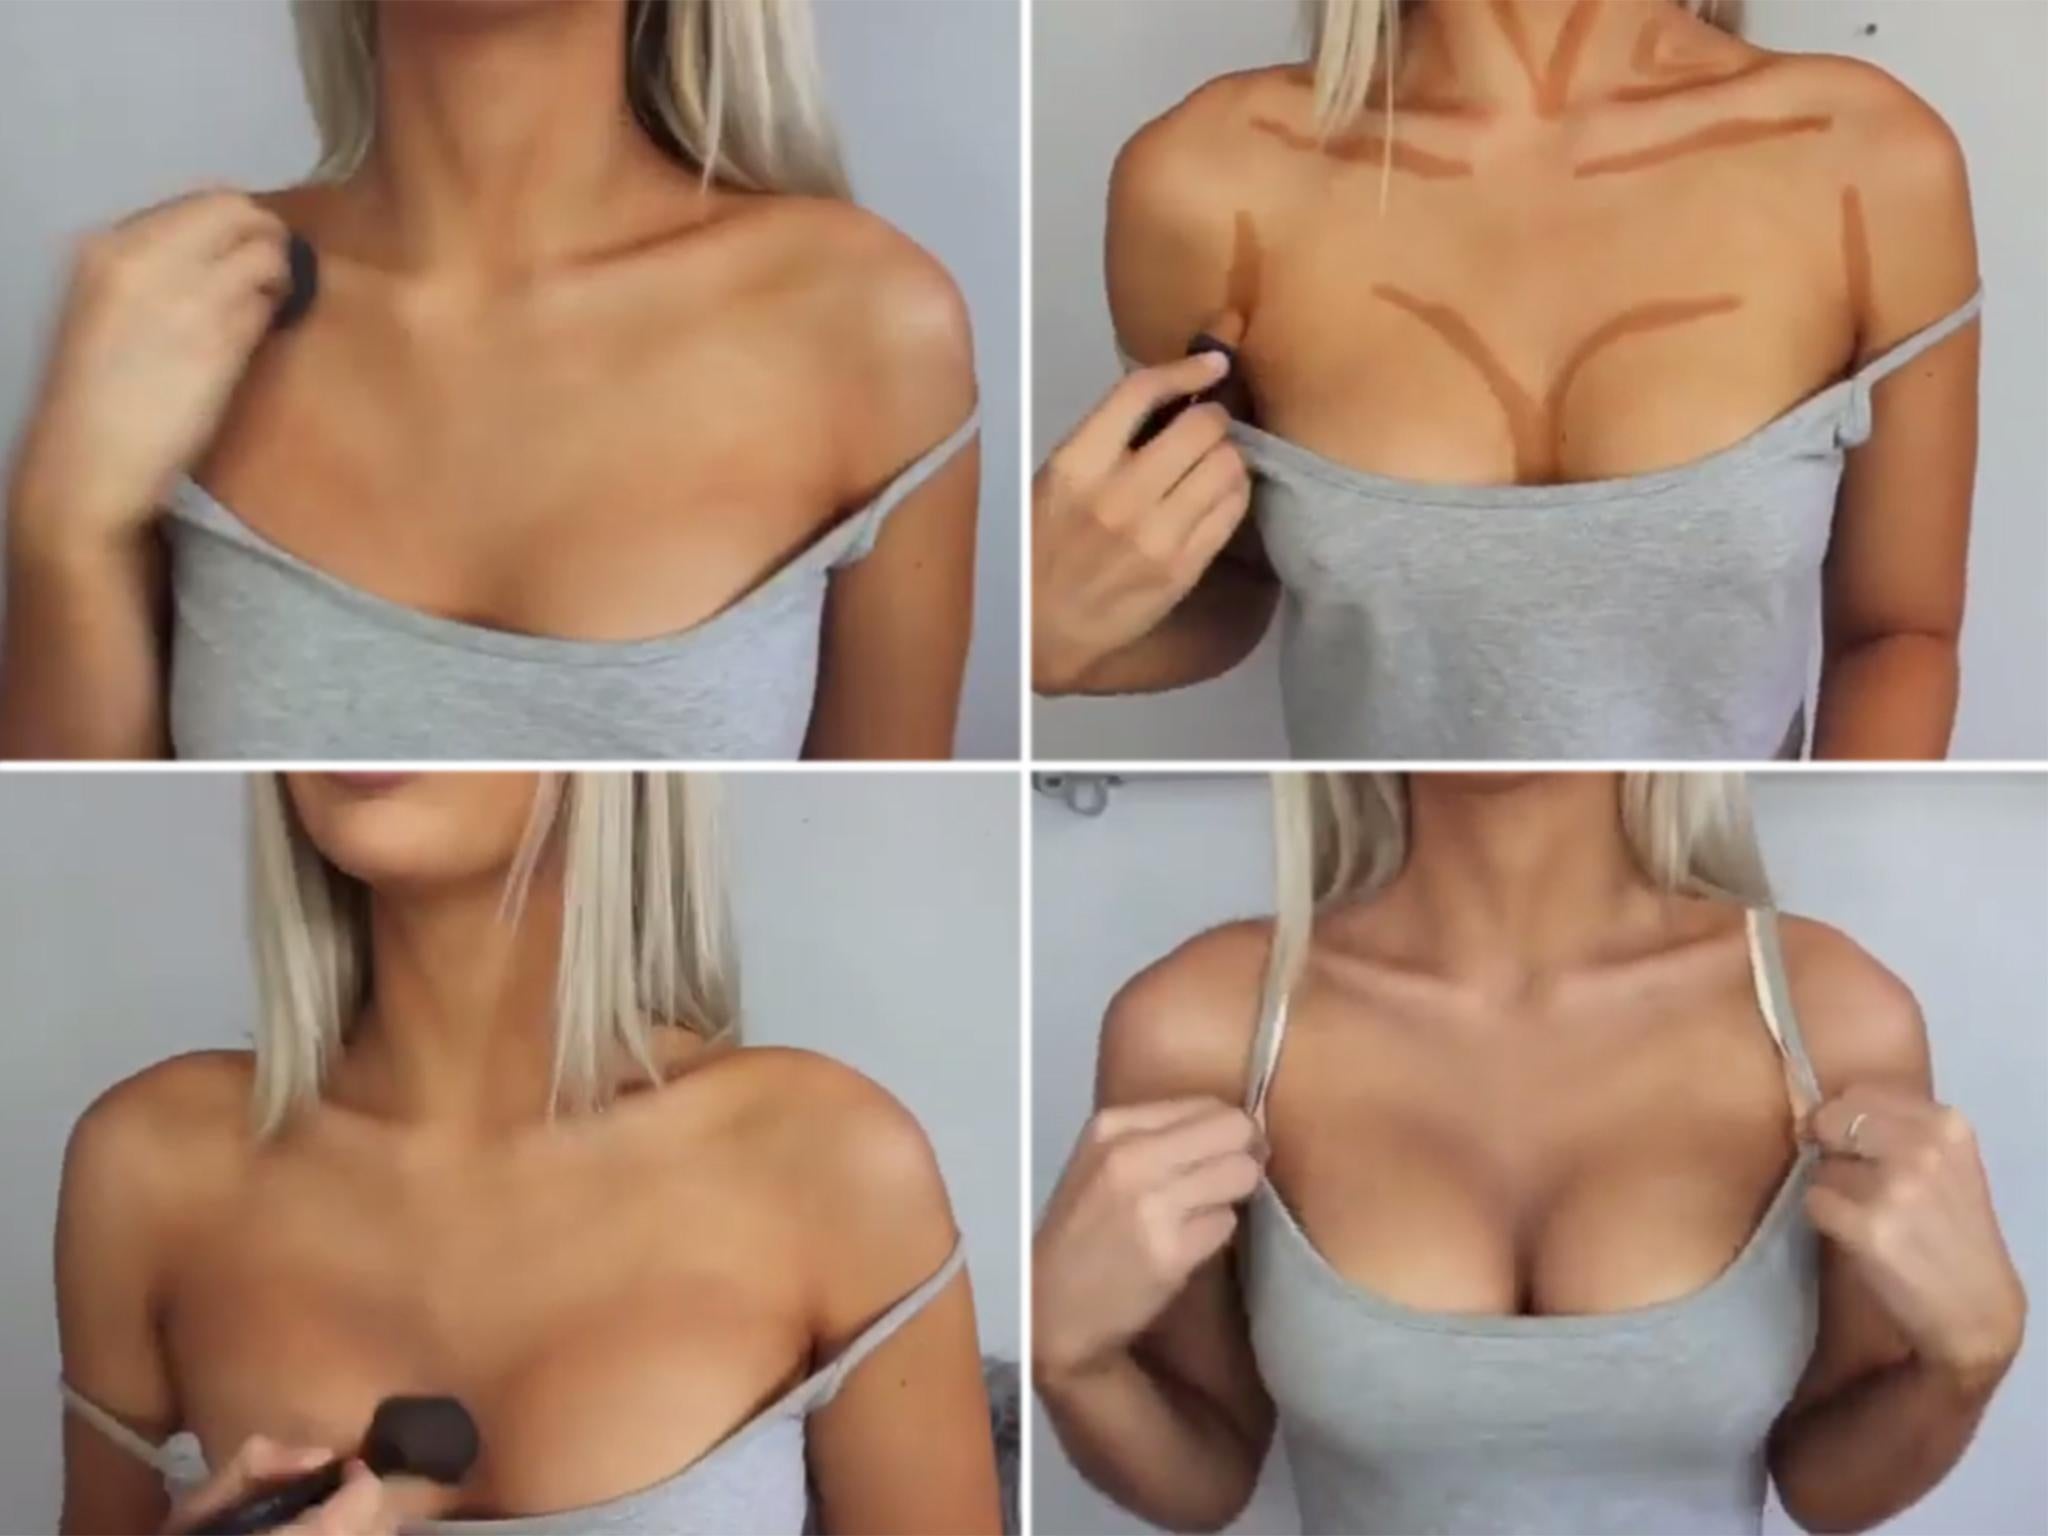 make-up tutorial shows women how to increase their breast